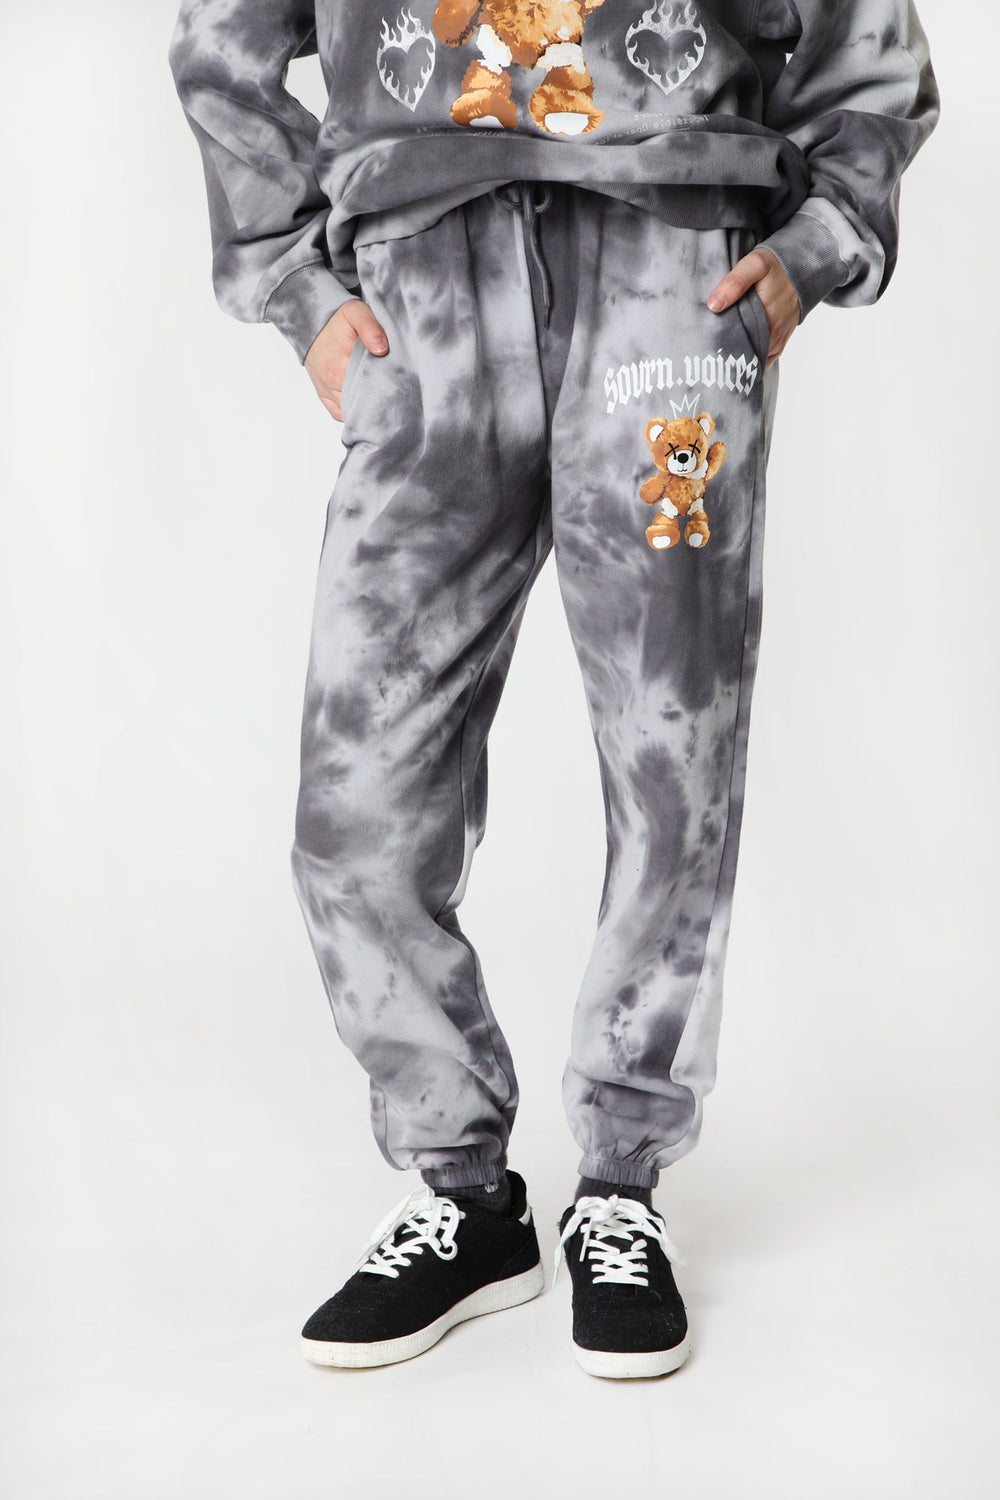 Womens Sovrn Voices Tie-Dye Sweatpant Womens Sovrn Voices Tie-Dye Sweatpant